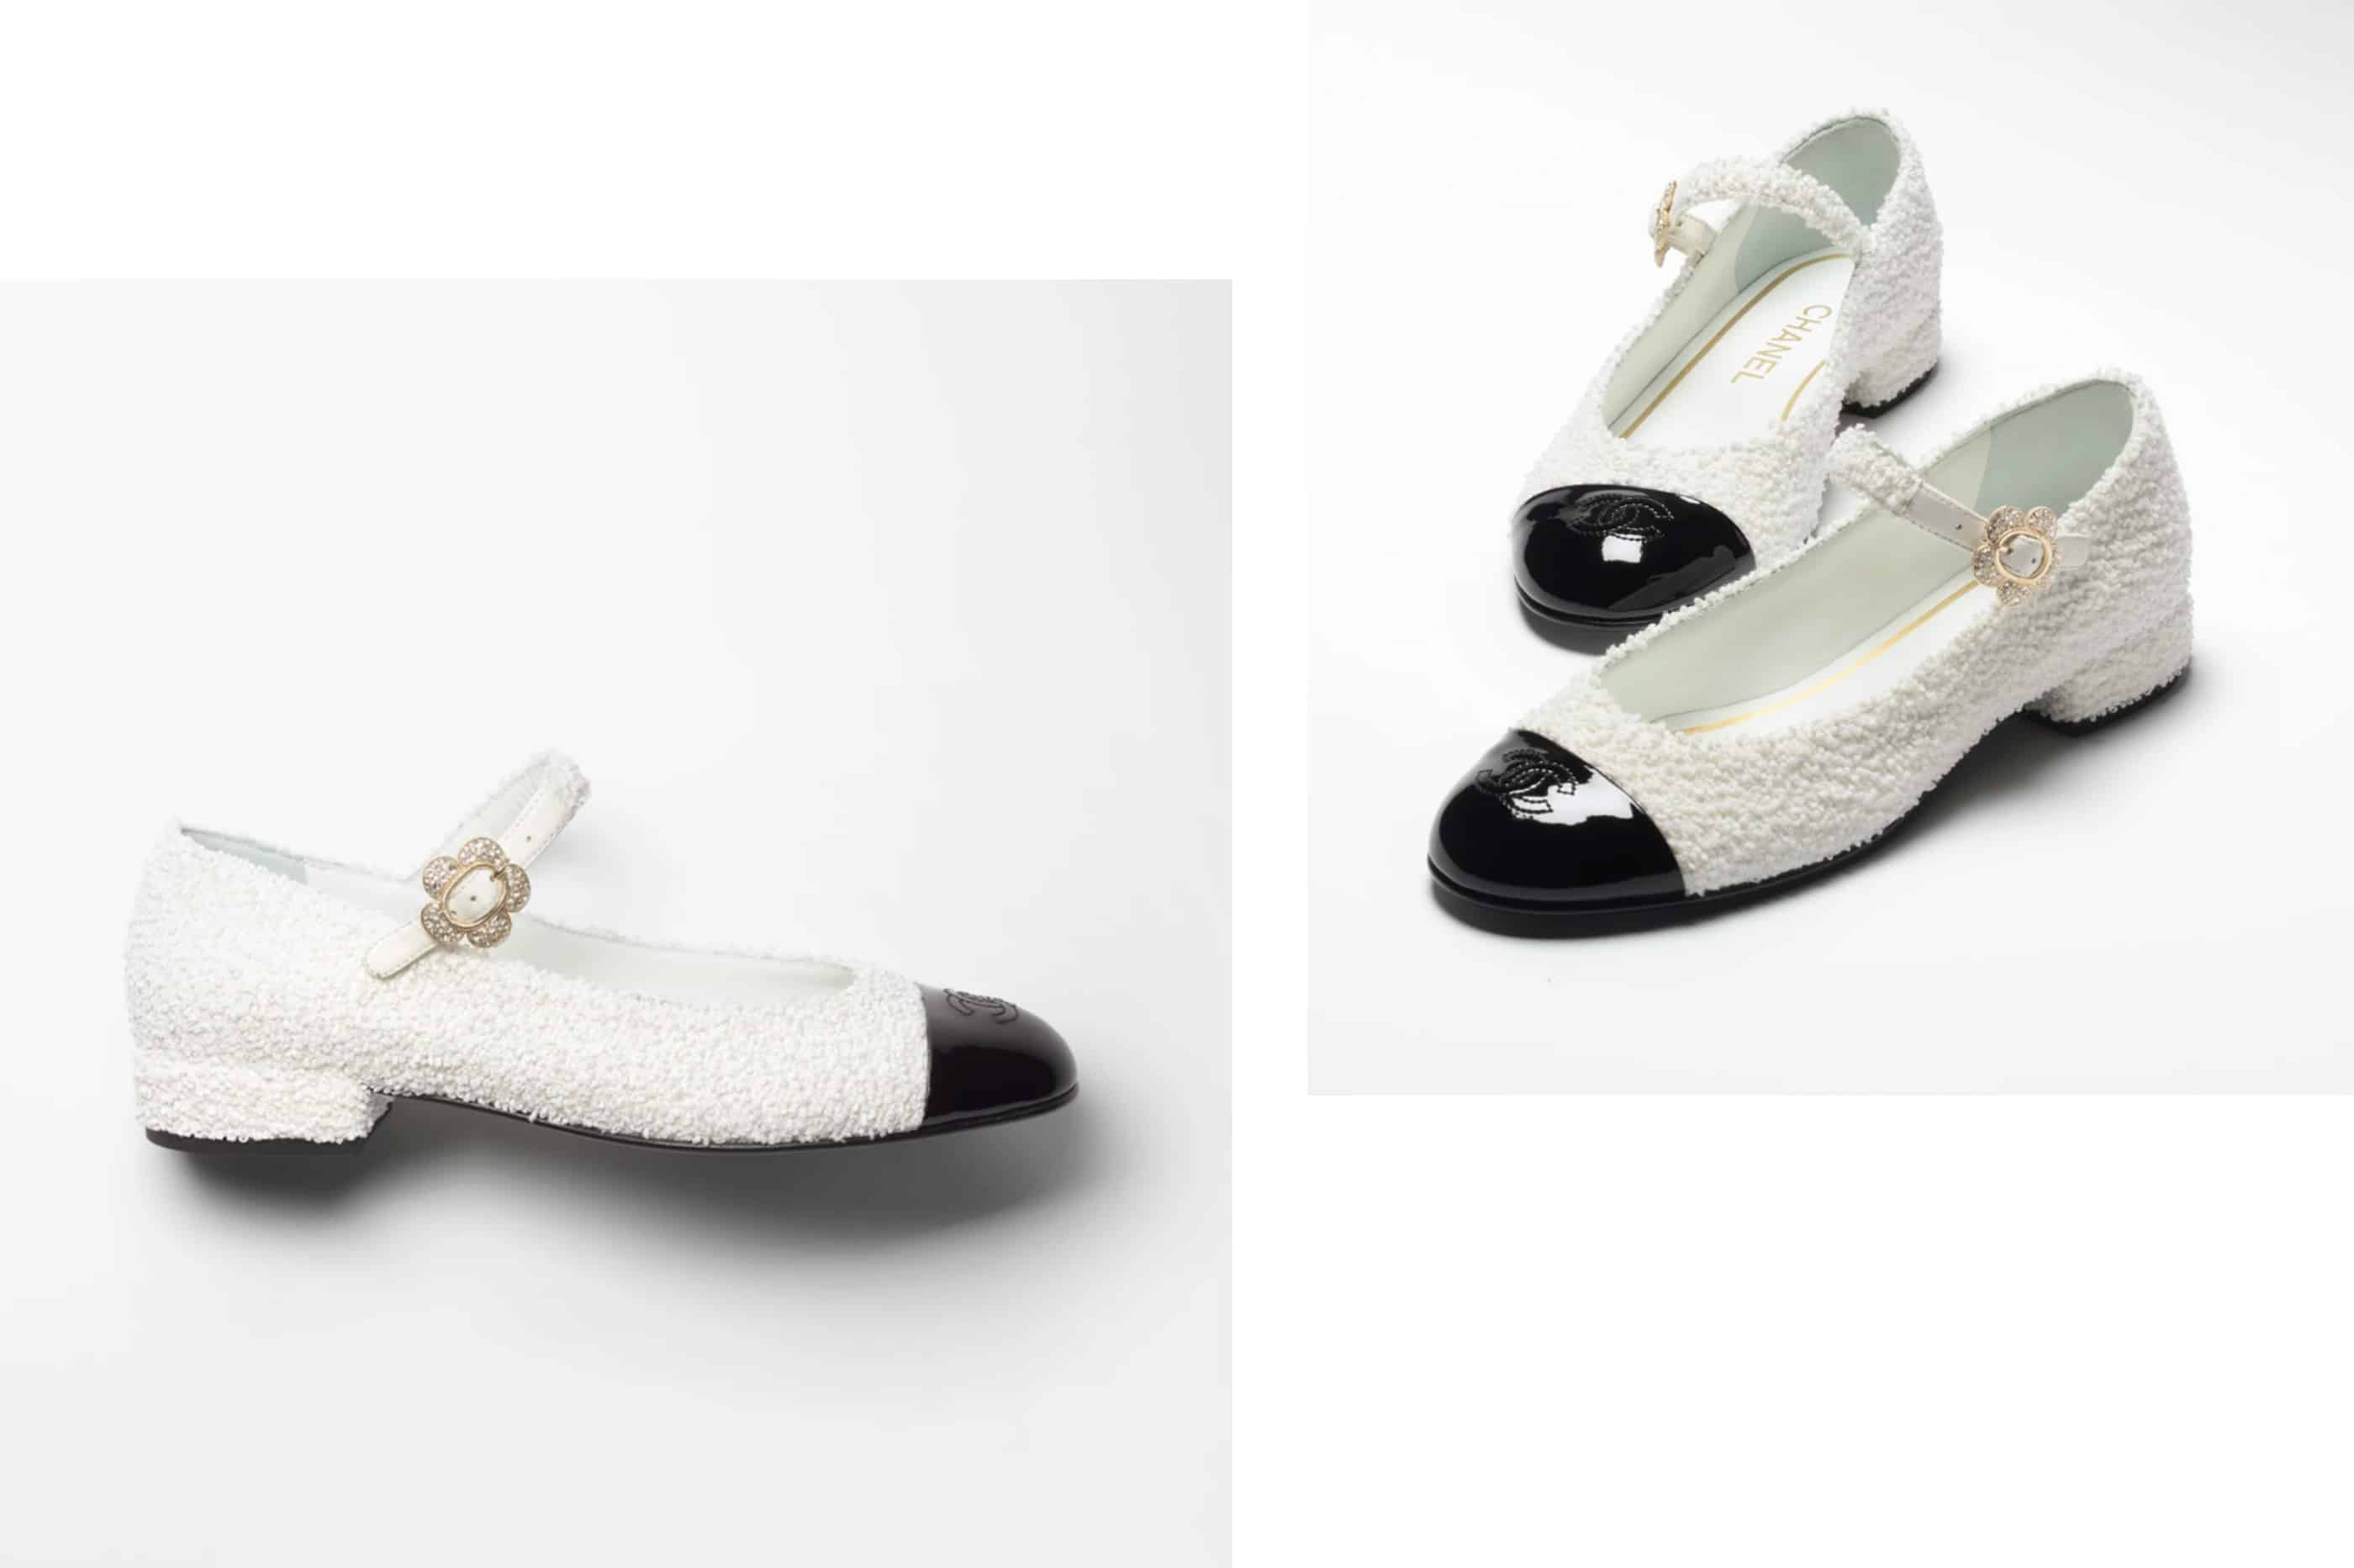 Les Georges - The Adorable Must-Have Mary Jane Flats We All Want This  Season! — Rosae Paris